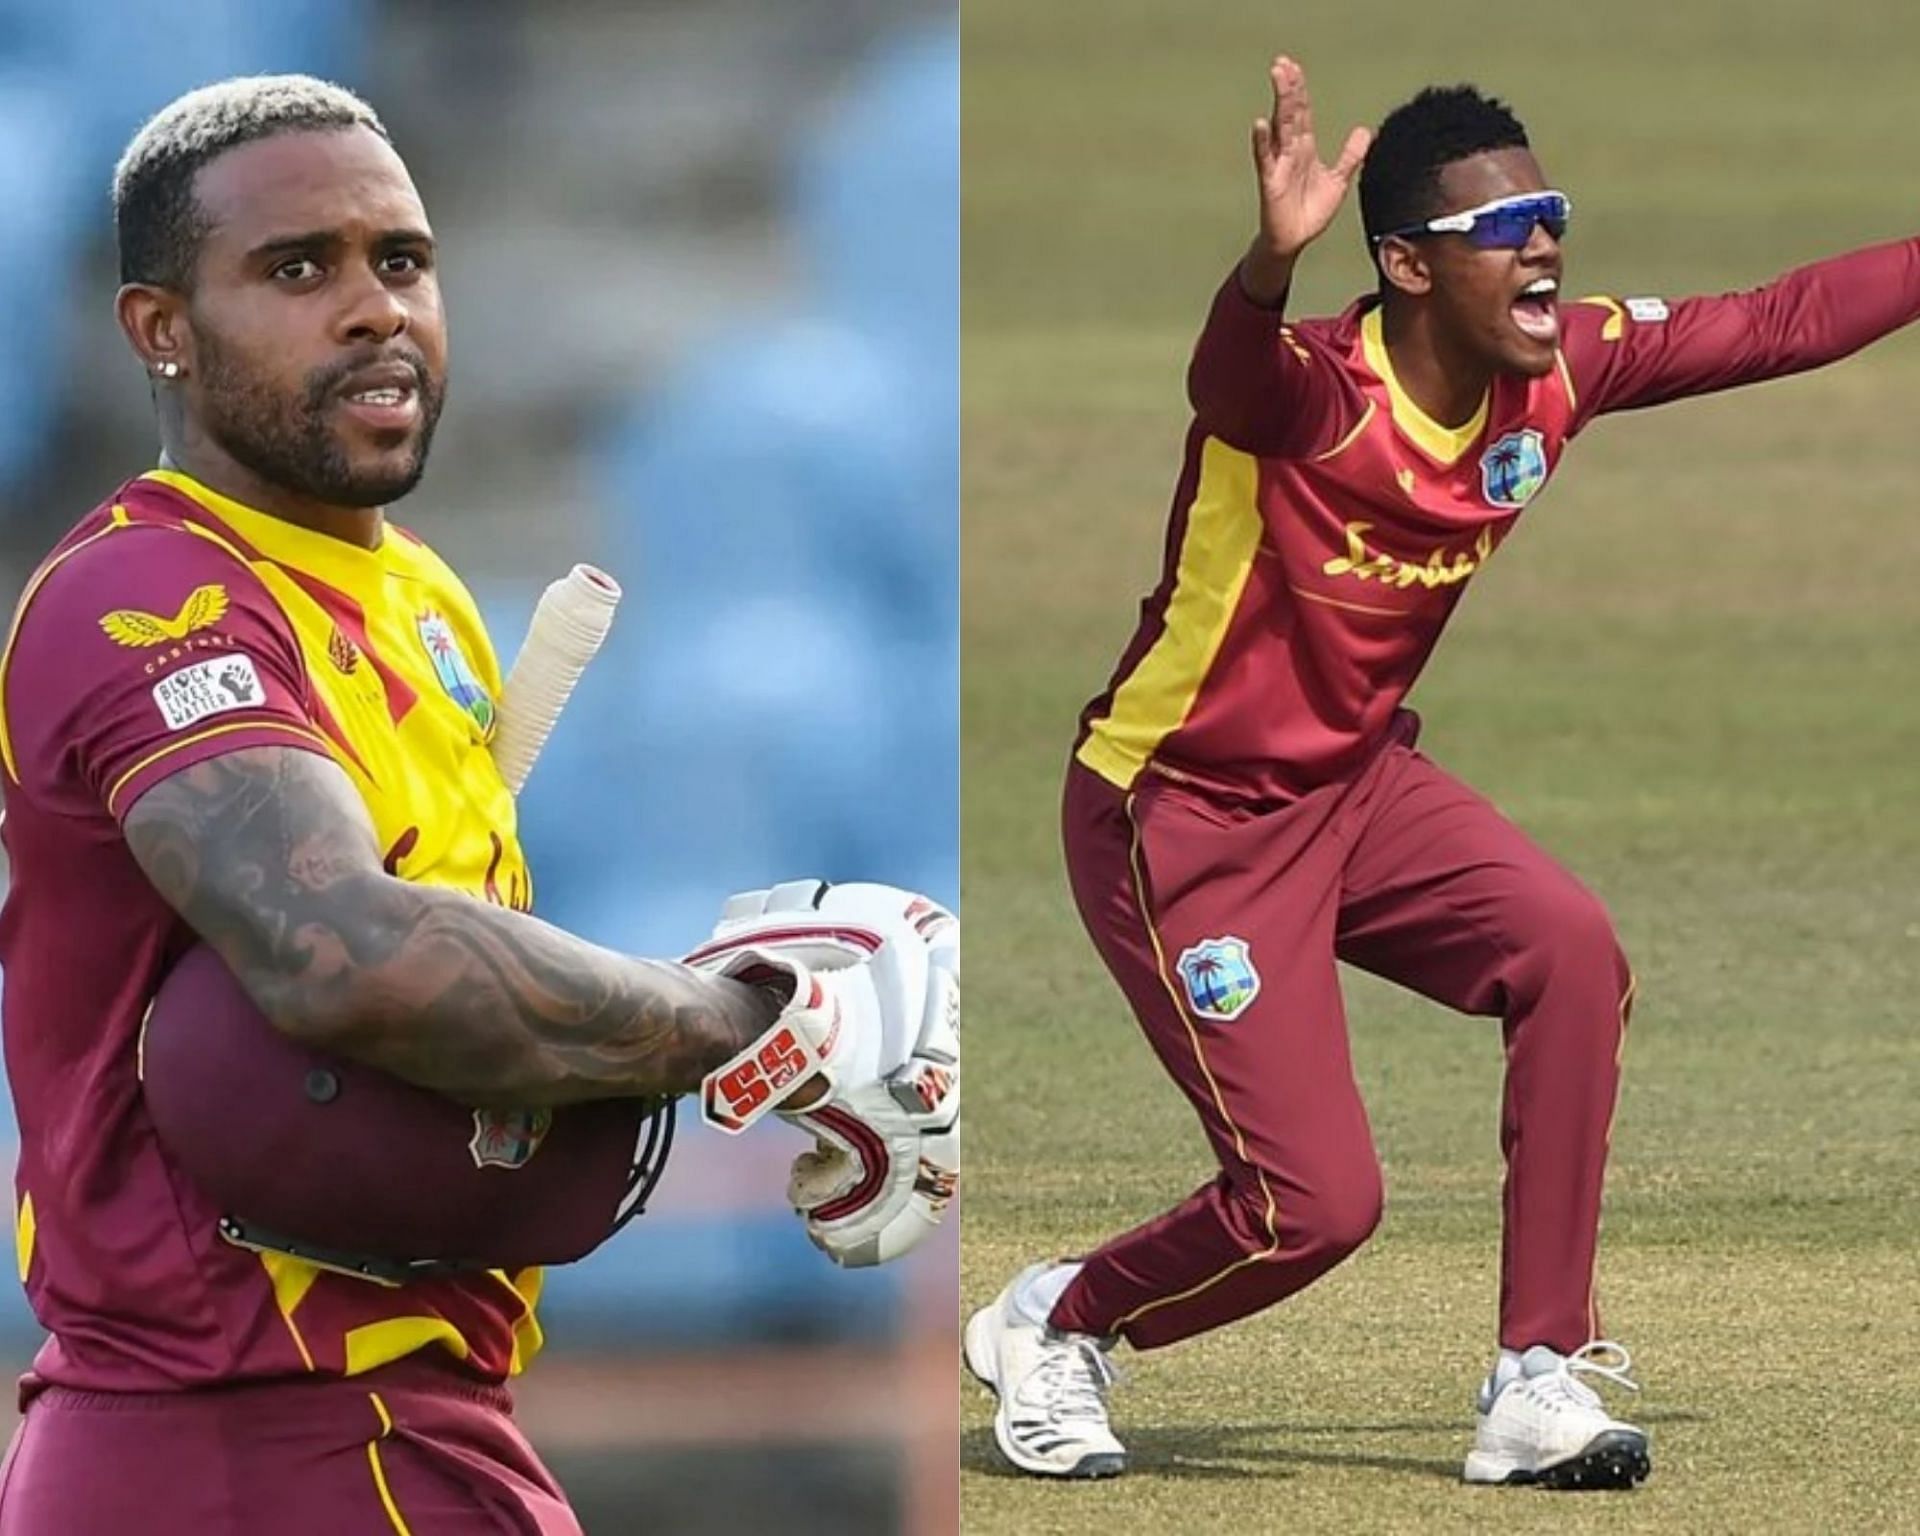 Fabian Allen (L) will be replaced by all-rounder Akeal Hosein in the squad